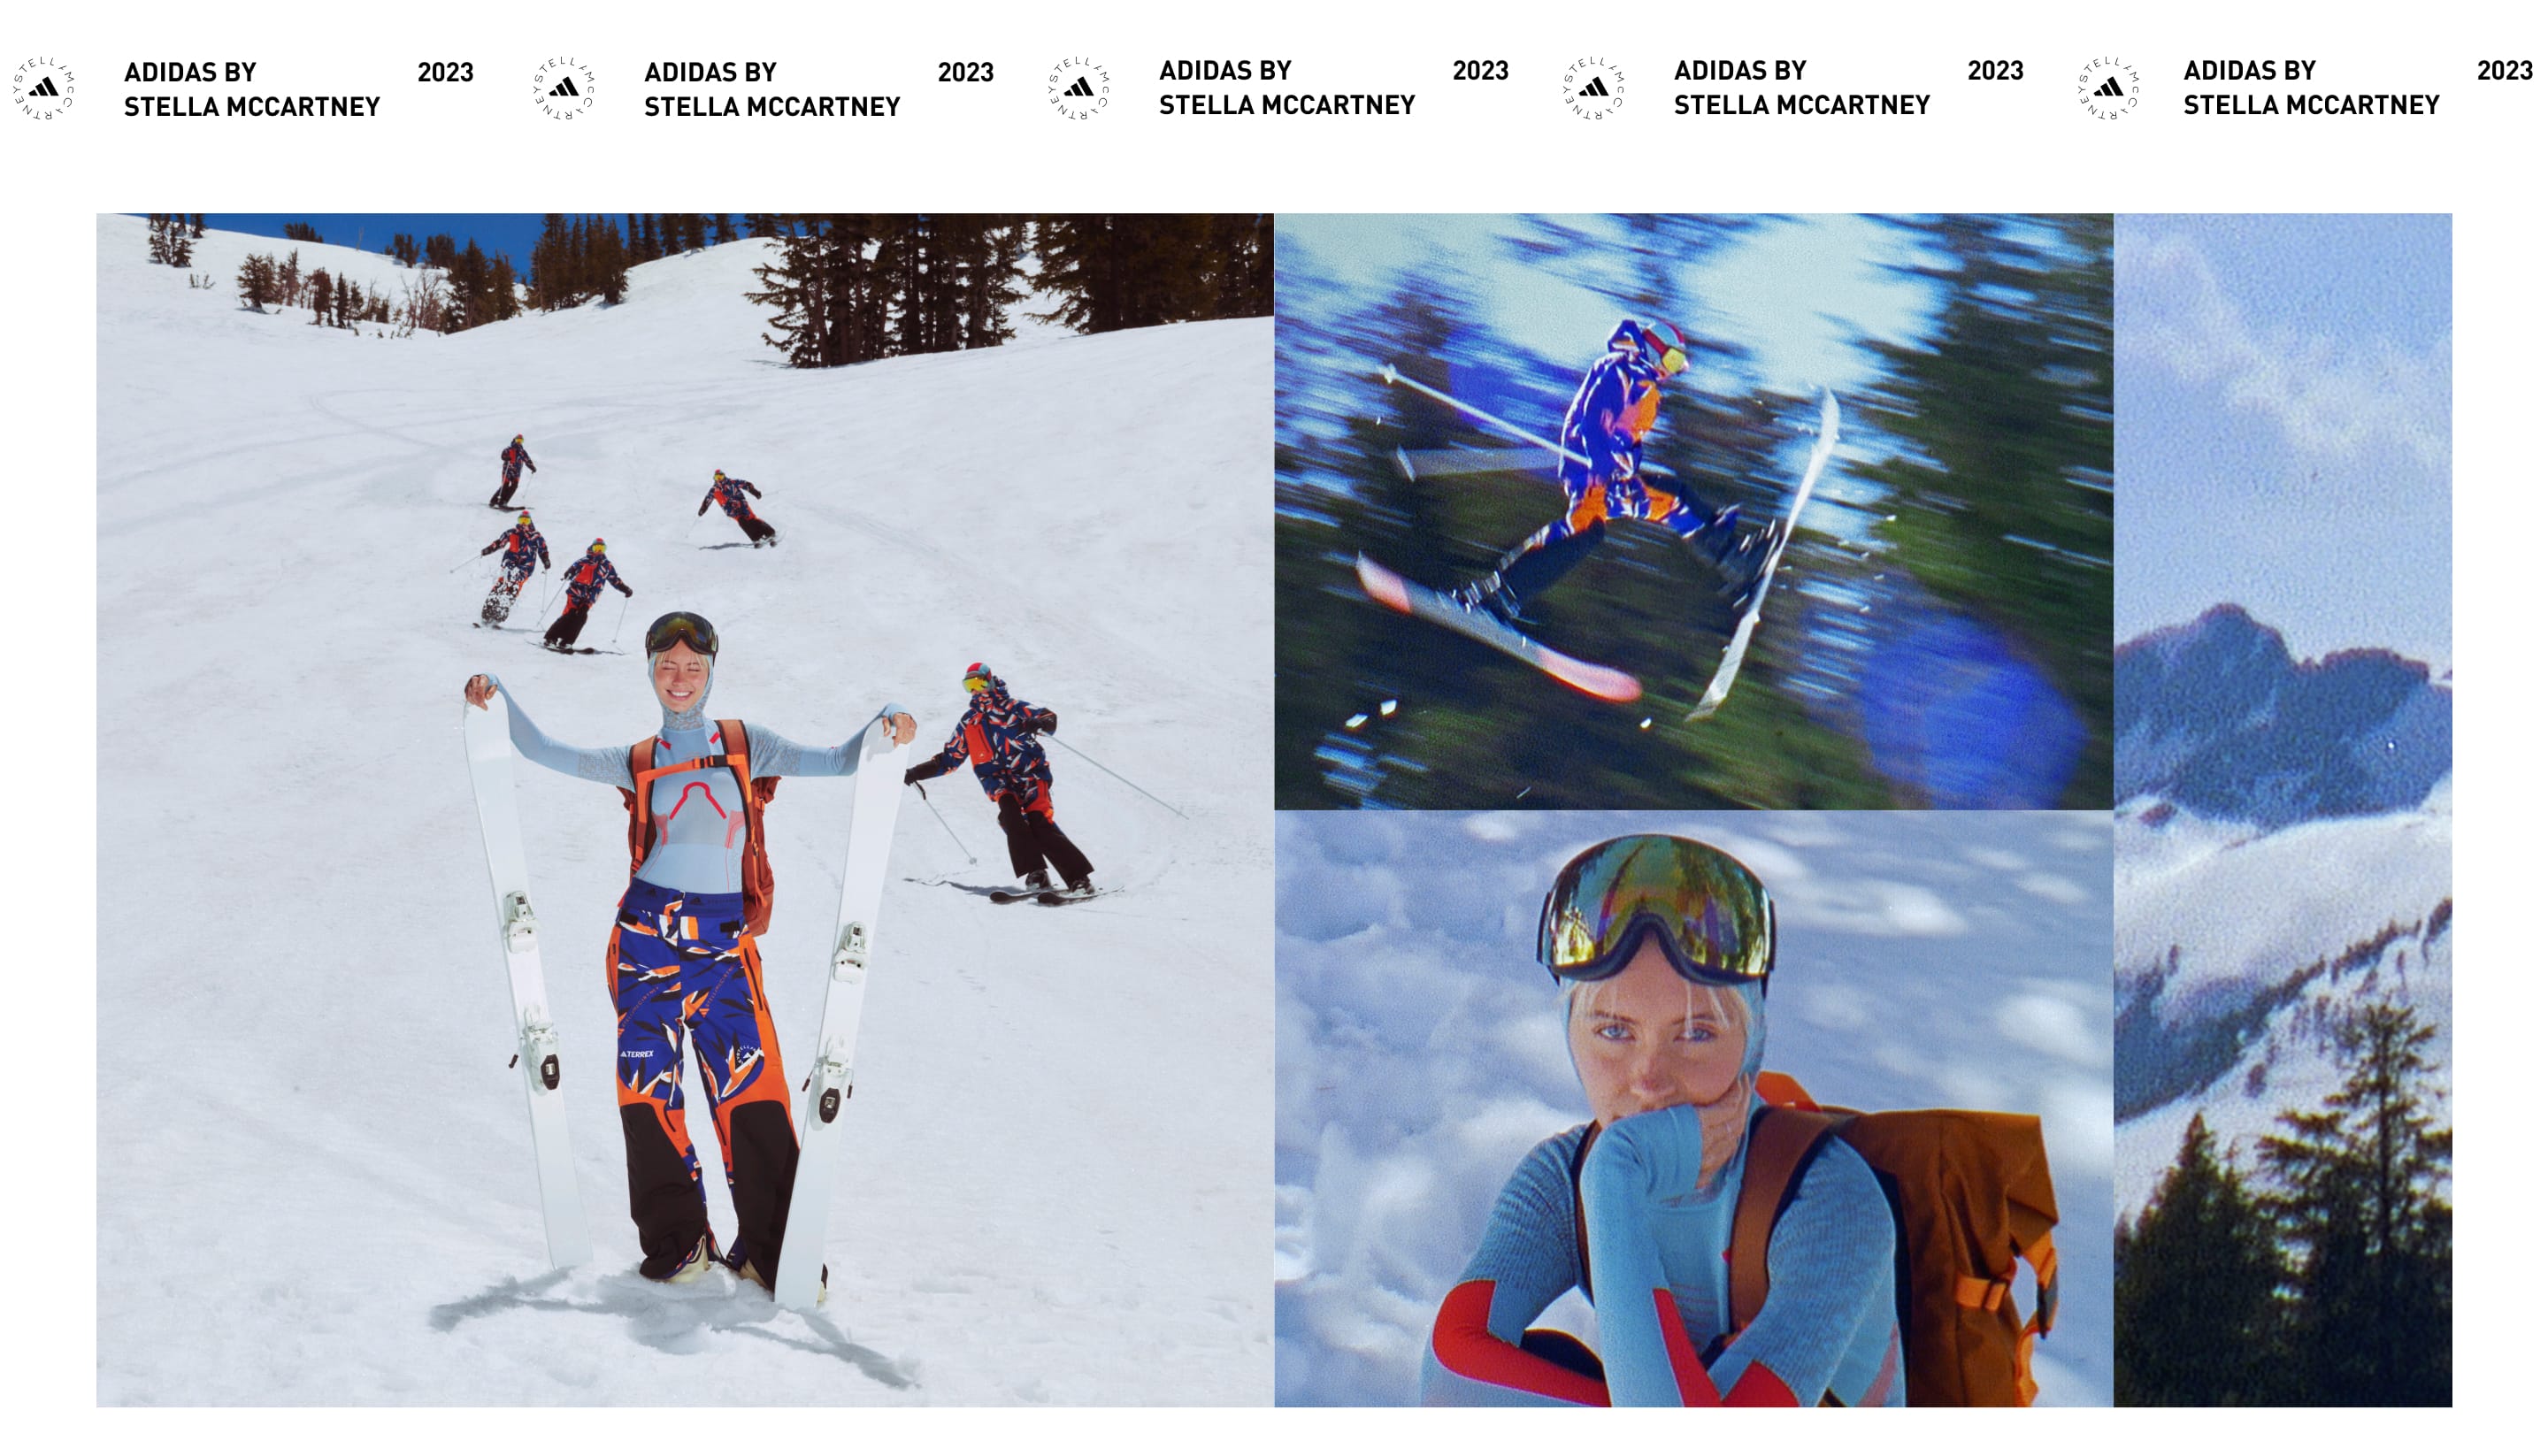 several images of female skier wearing different jackets and trousers from the adidas by Stella McCartney x Terrex winter sports collection on a ski slope